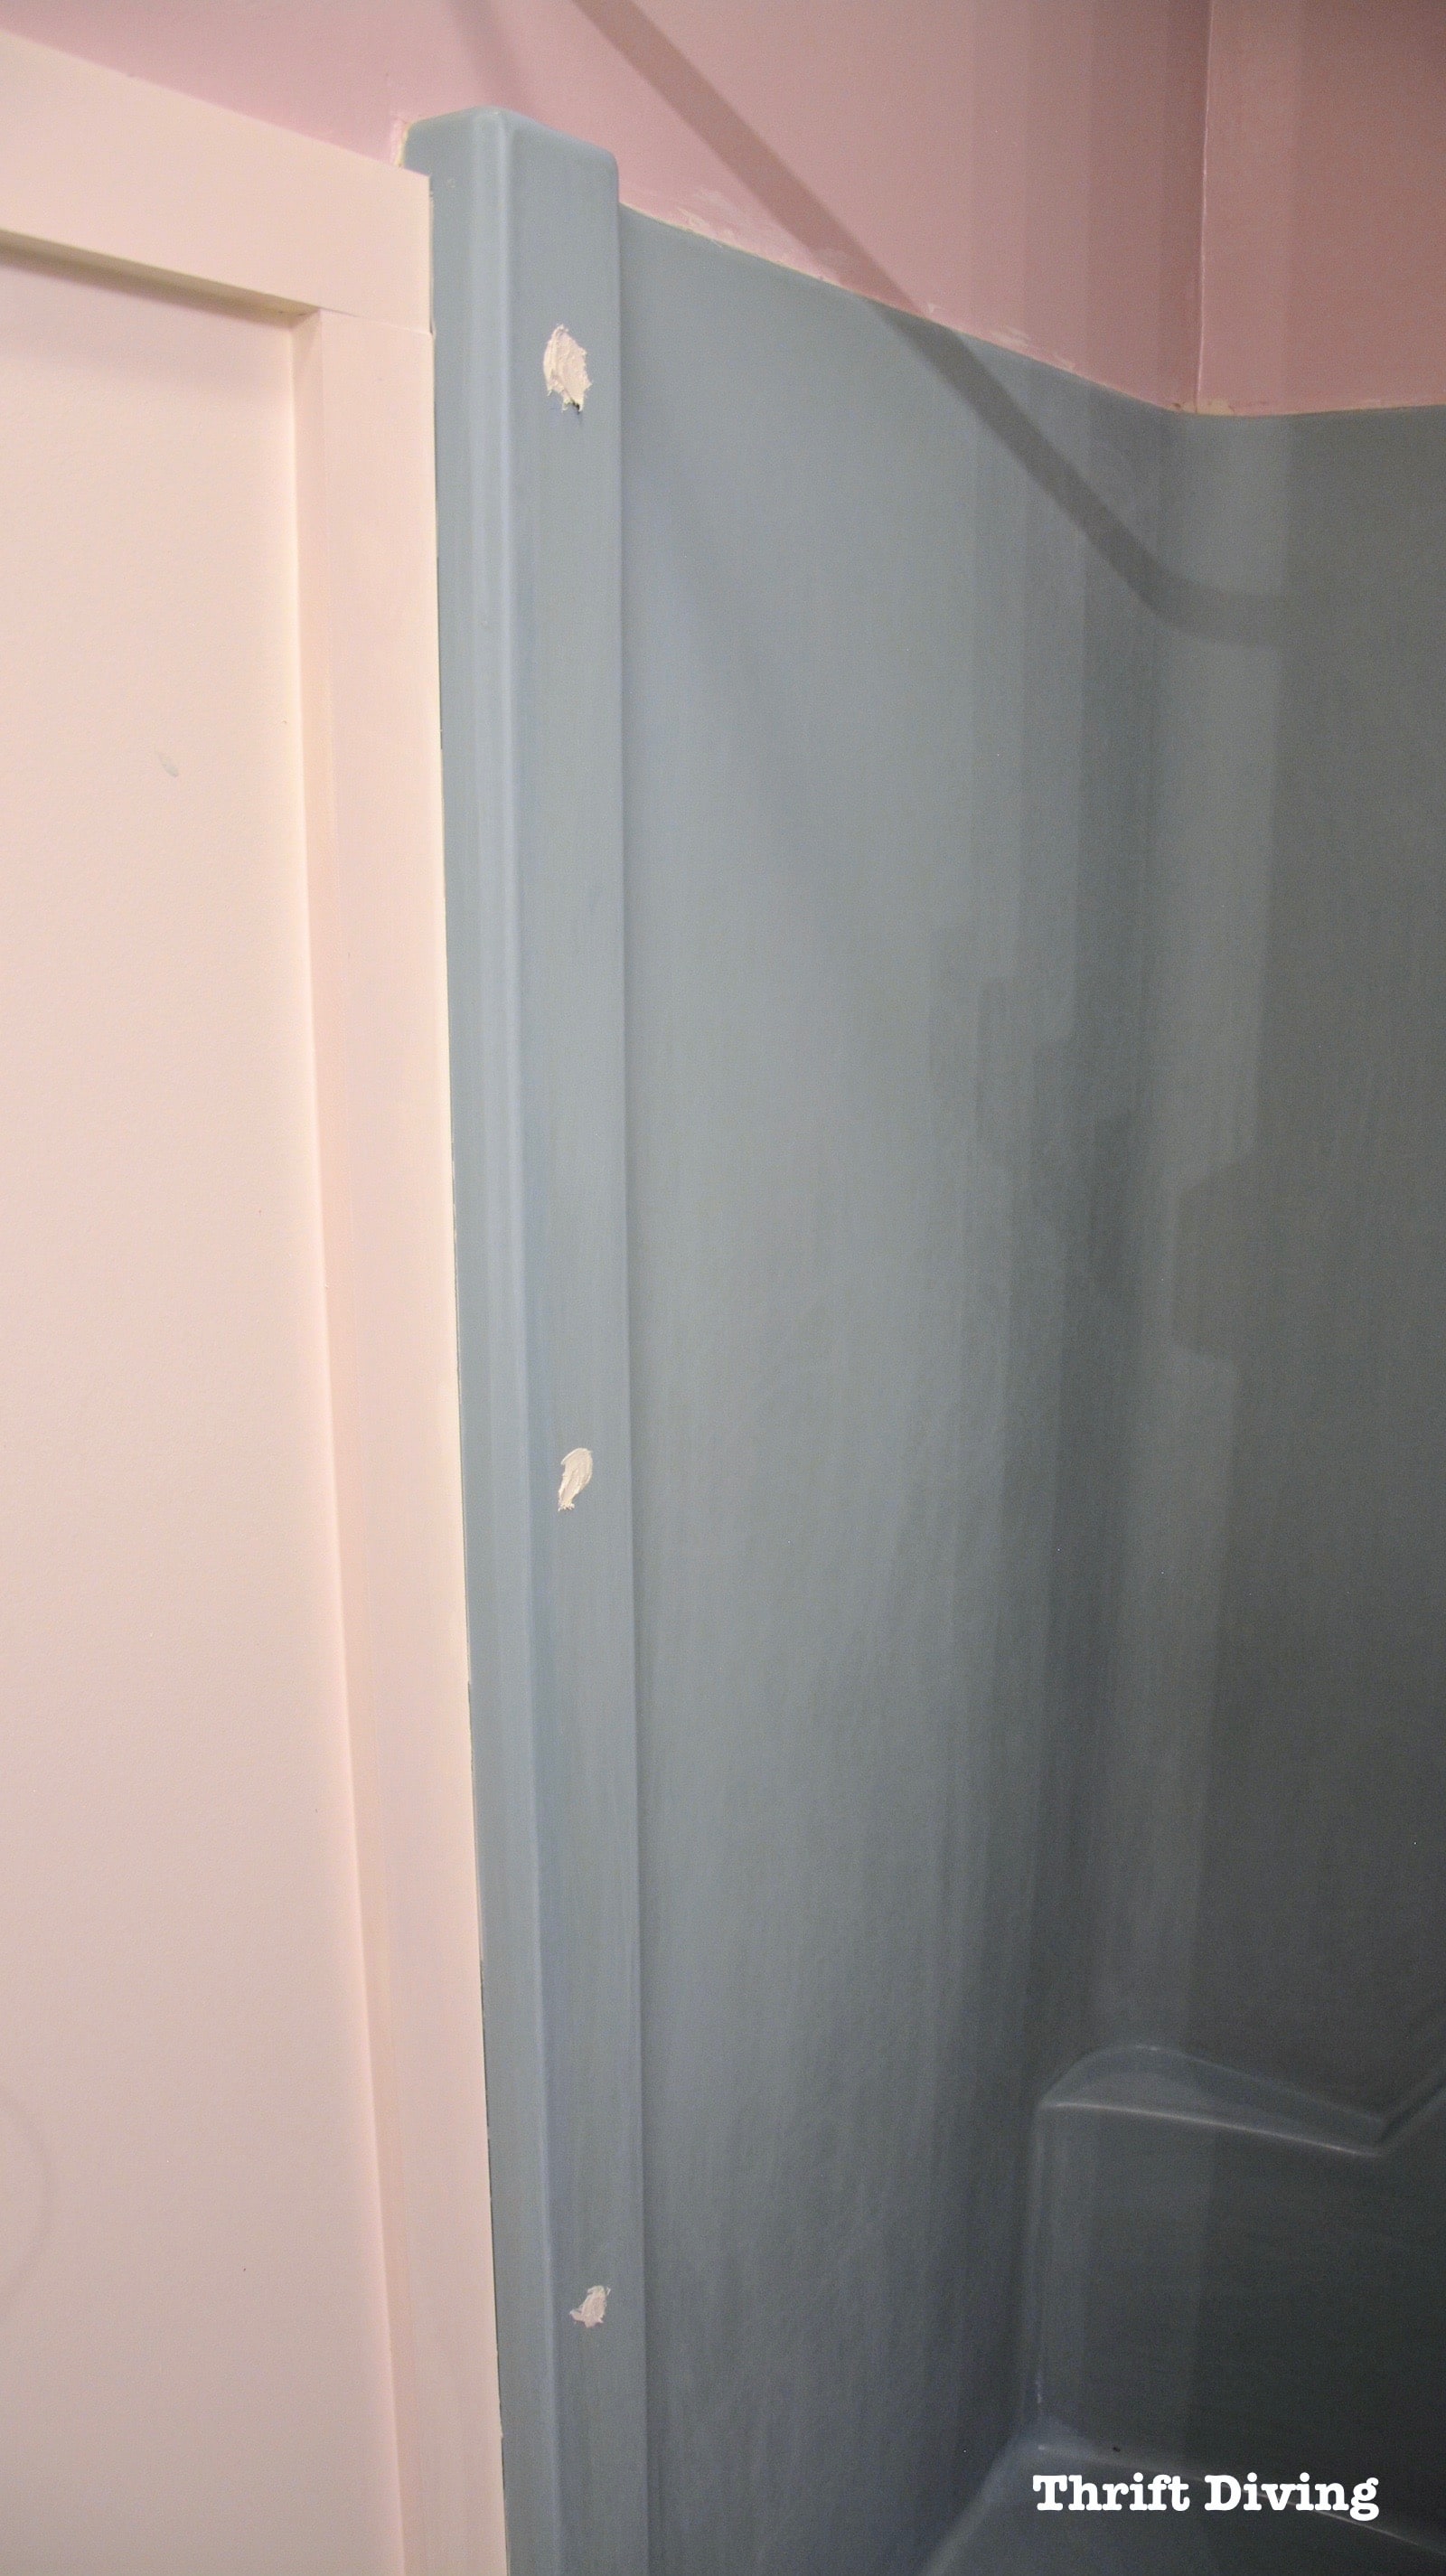 Shower-and-tub-refinishing-how-to-paint-a-shower-tub-Thrift-Diving-Blog-8844 (1)